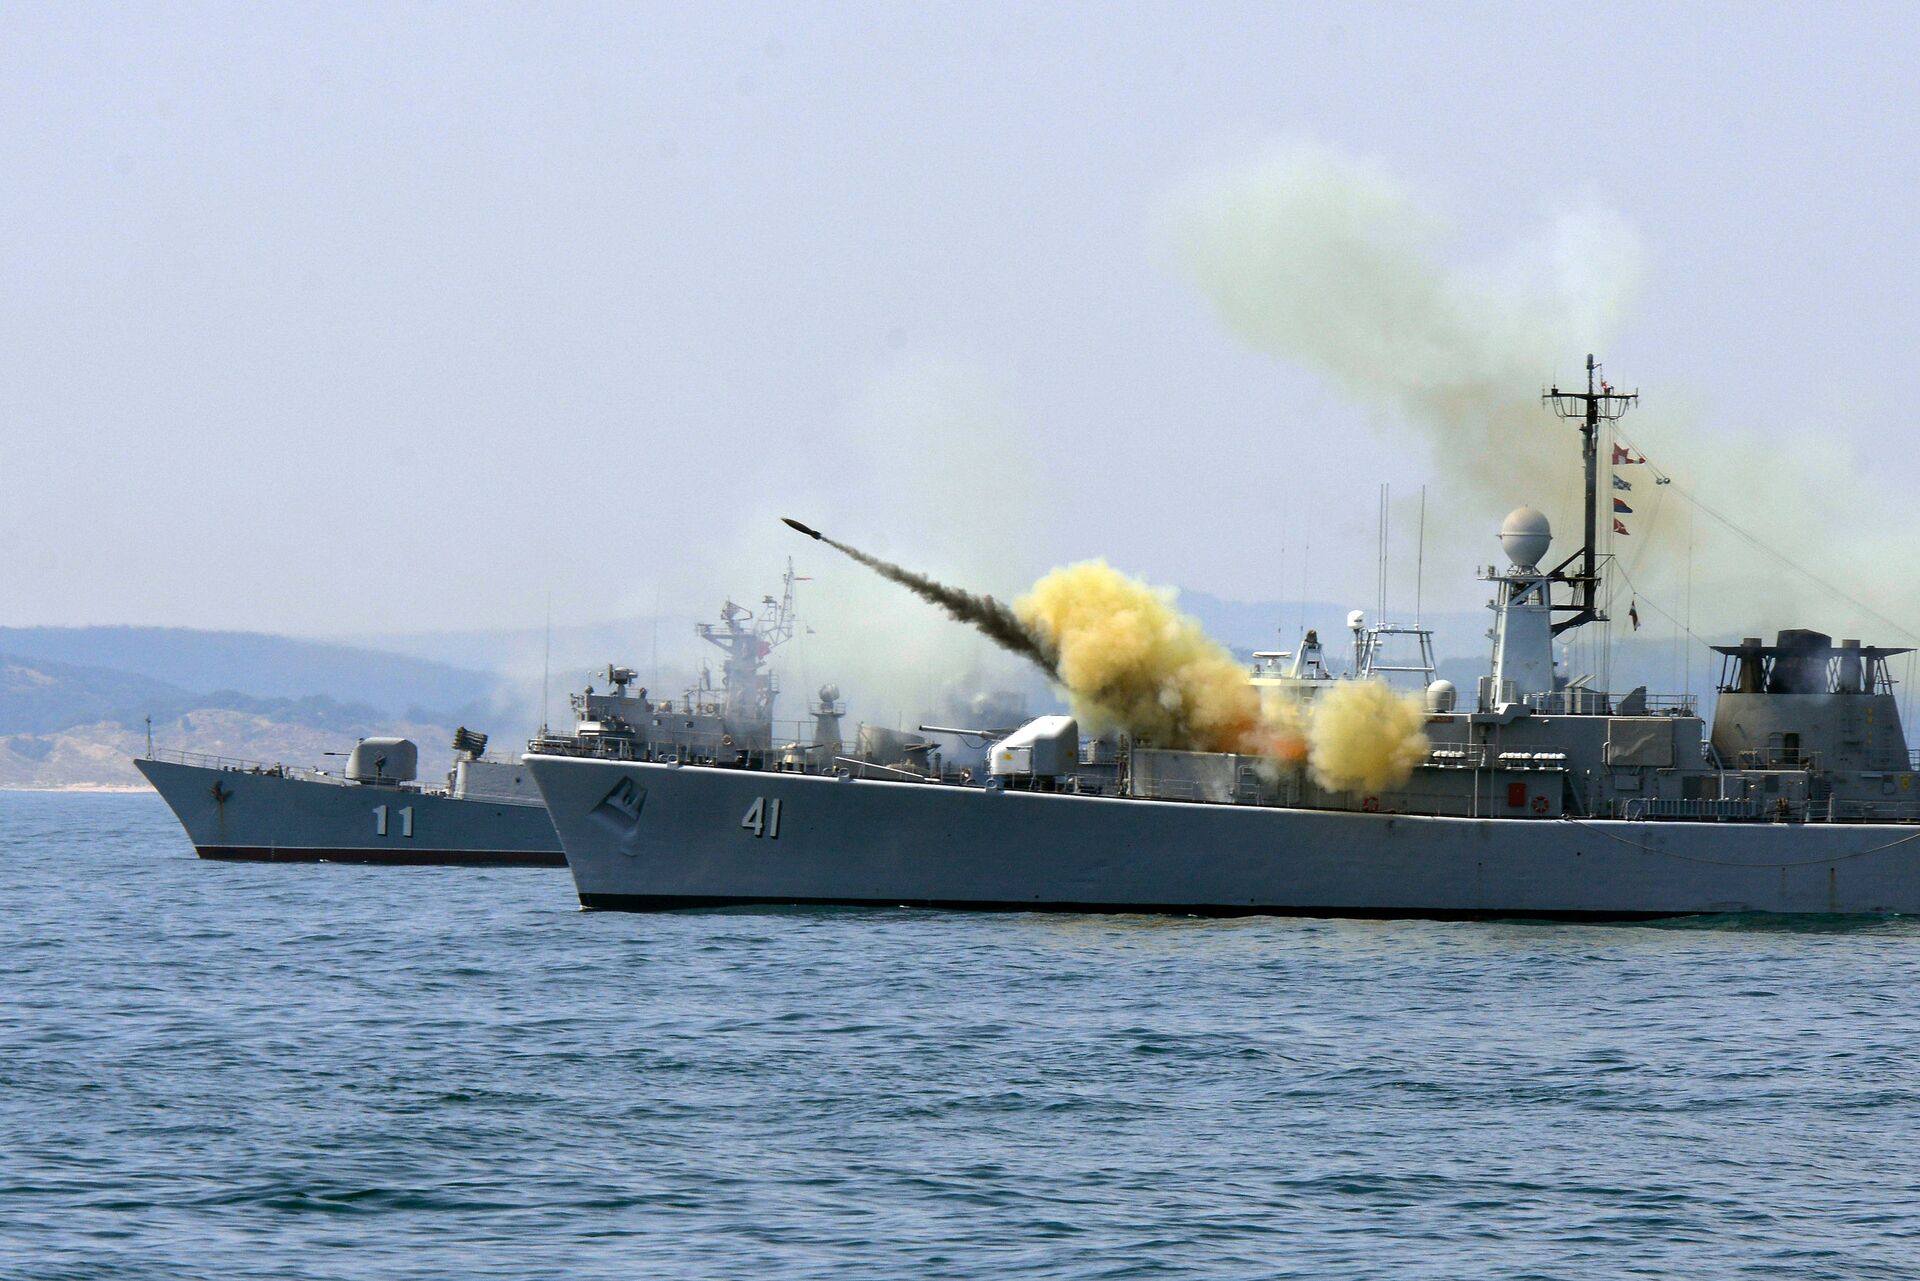 An anti-submarine rocket blasts off a rocket launcher from the Bulgarian navy frigate Drazki during the BREEZE 2014 military drill in the Black Sea - Sputnik International, 1920, 13.11.2021